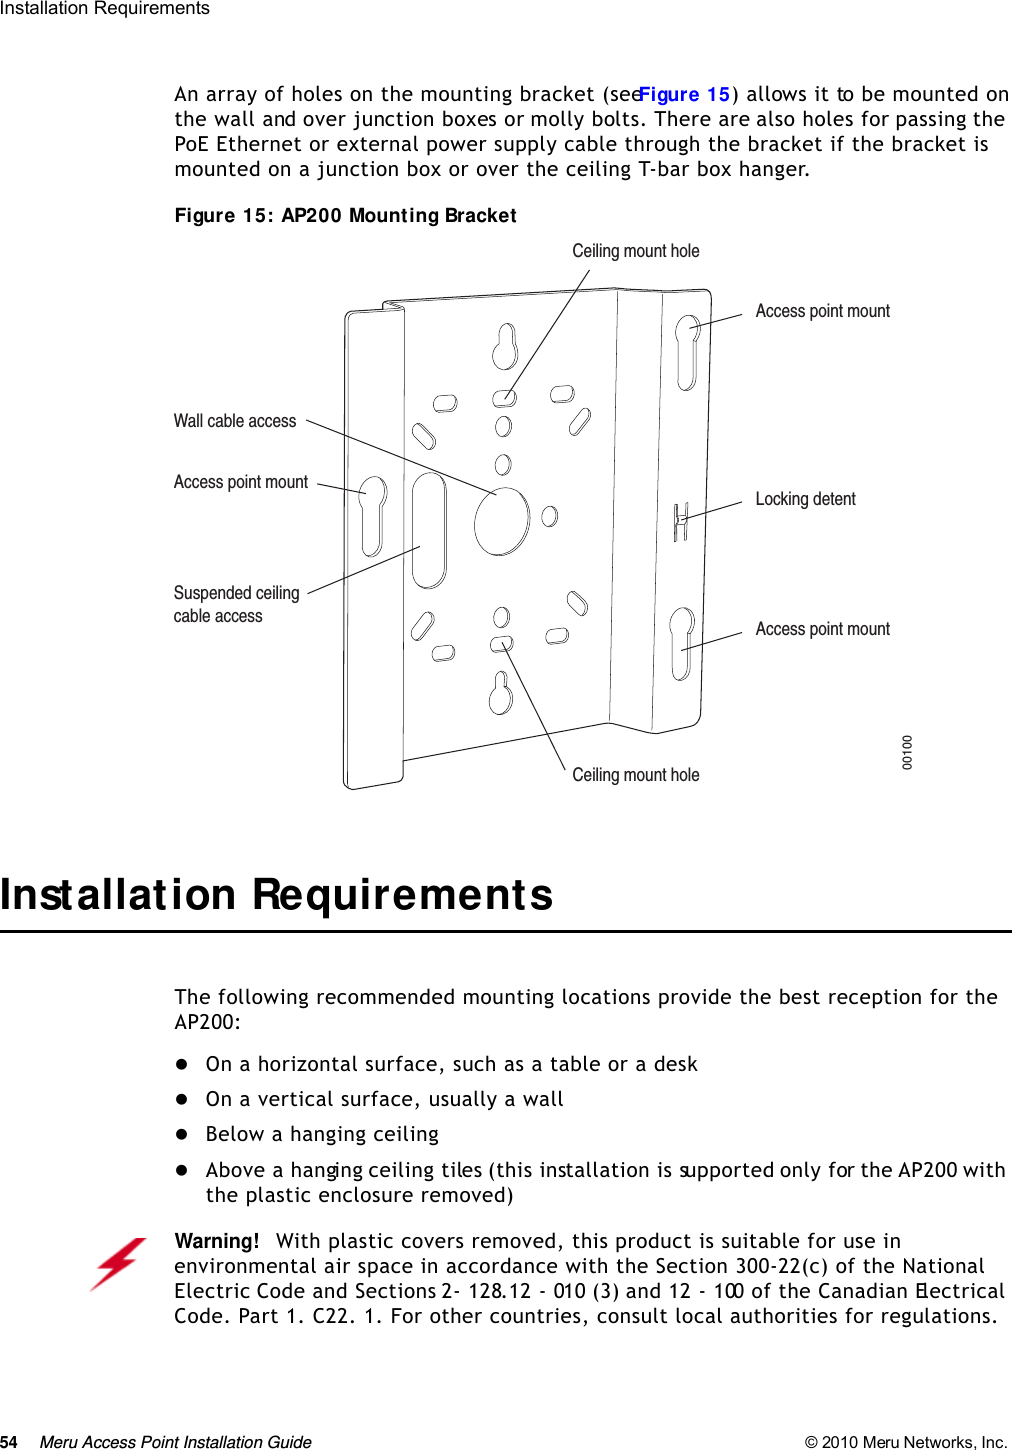 54 Meru Access Point Installation Guide © 2010 Meru Networks, Inc. Installation Requirements An array of holes on the mounting bracket (see Figure 15) allows it to be mounted on the wall and over junction boxes or molly bolts. There are also holes for passing the PoE Ethernet or external power supply cable through the bracket if the bracket is mounted on a junction box or over the ceiling T-bar box hanger. Figure 15: AP200 Mounting BracketInstallation RequirementsThe following recommended mounting locations provide the best reception for the AP200:On a horizontal surface, such as a table or a deskOn a vertical surface, usually a wallBelow a hanging ceilingAbove a hanging ceiling tiles (this installation is supported only for the AP200 with the plastic enclosure removed)Access point mountCeiling mount holeCeiling mount holeAccess point mountAccess point mountLocking detentWall cable accessSuspended ceilingcable access00100Warning!   With plastic covers removed, this product is suitable for use in environmental air space in accordance with the Section 300-22(c) of the National Electric Code and Sections 2- 128.12 - 010 (3) and 12 - 100 of the Canadian Electrical Code. Part 1. C22. 1. For other countries, consult local authorities for regulations.